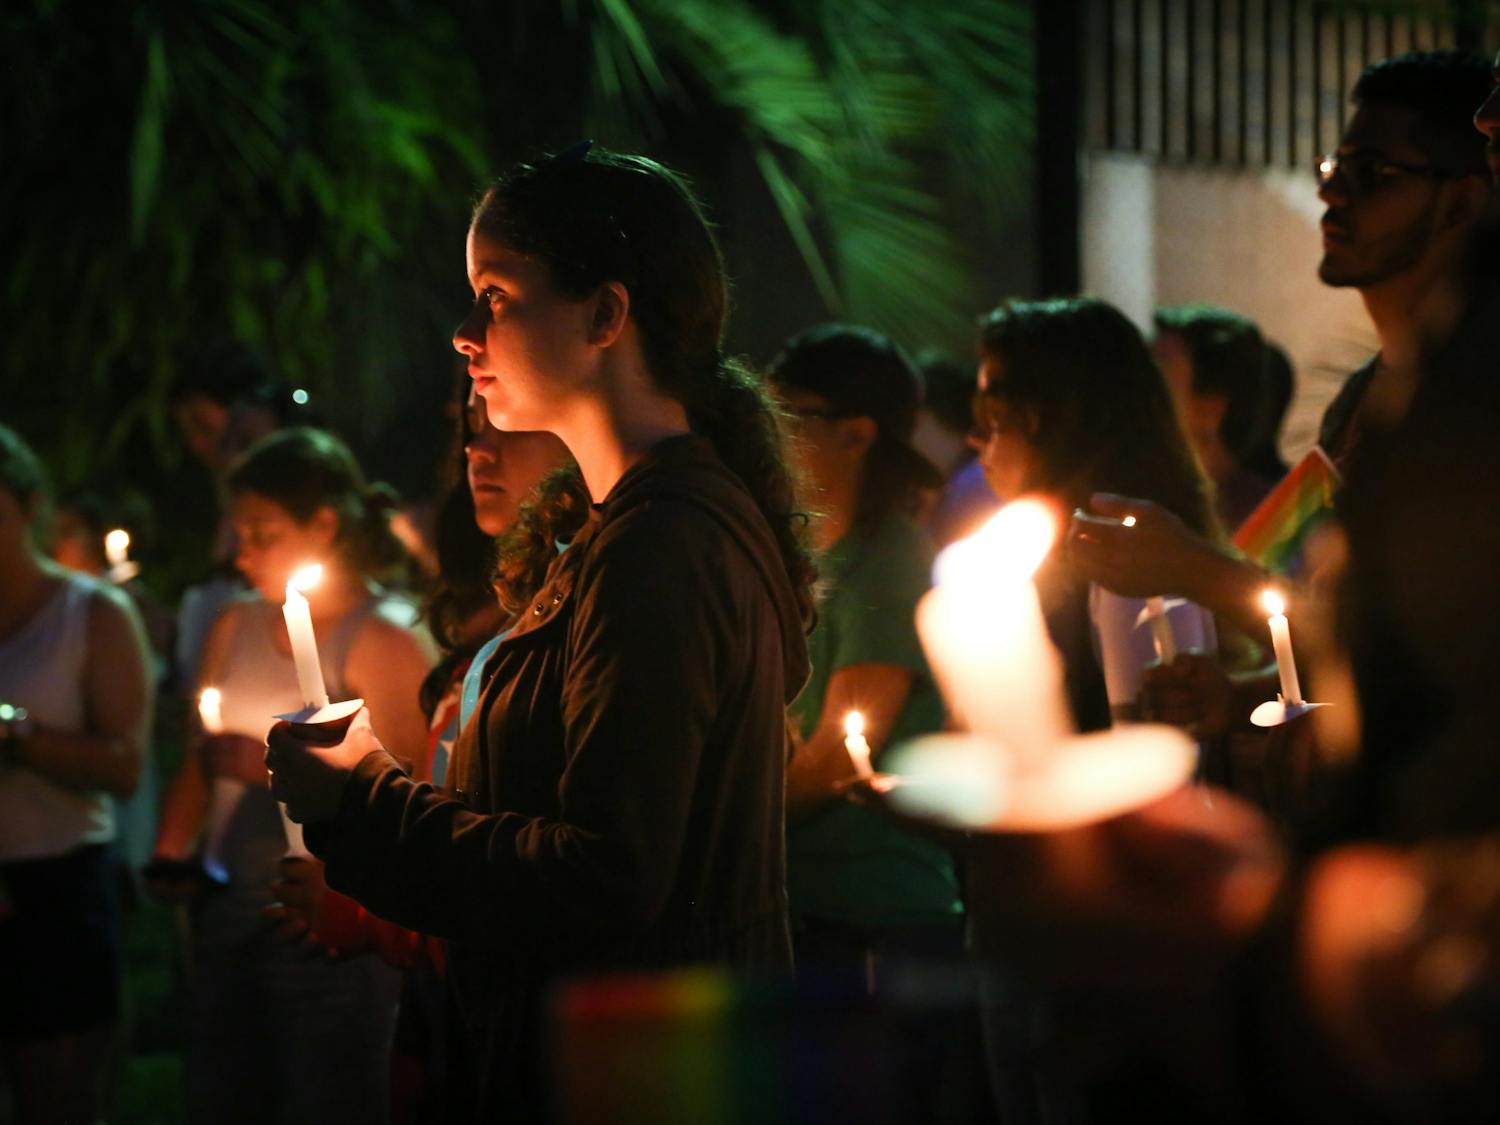 Frances Patala, a 20-year-old UF animal sciences senior, listens to the speeches made on Tuesday evening at the Pulse Commemoration and Unity Ceremony. About 650 people came to the event, which included seven speakers and a candlelight vigil.